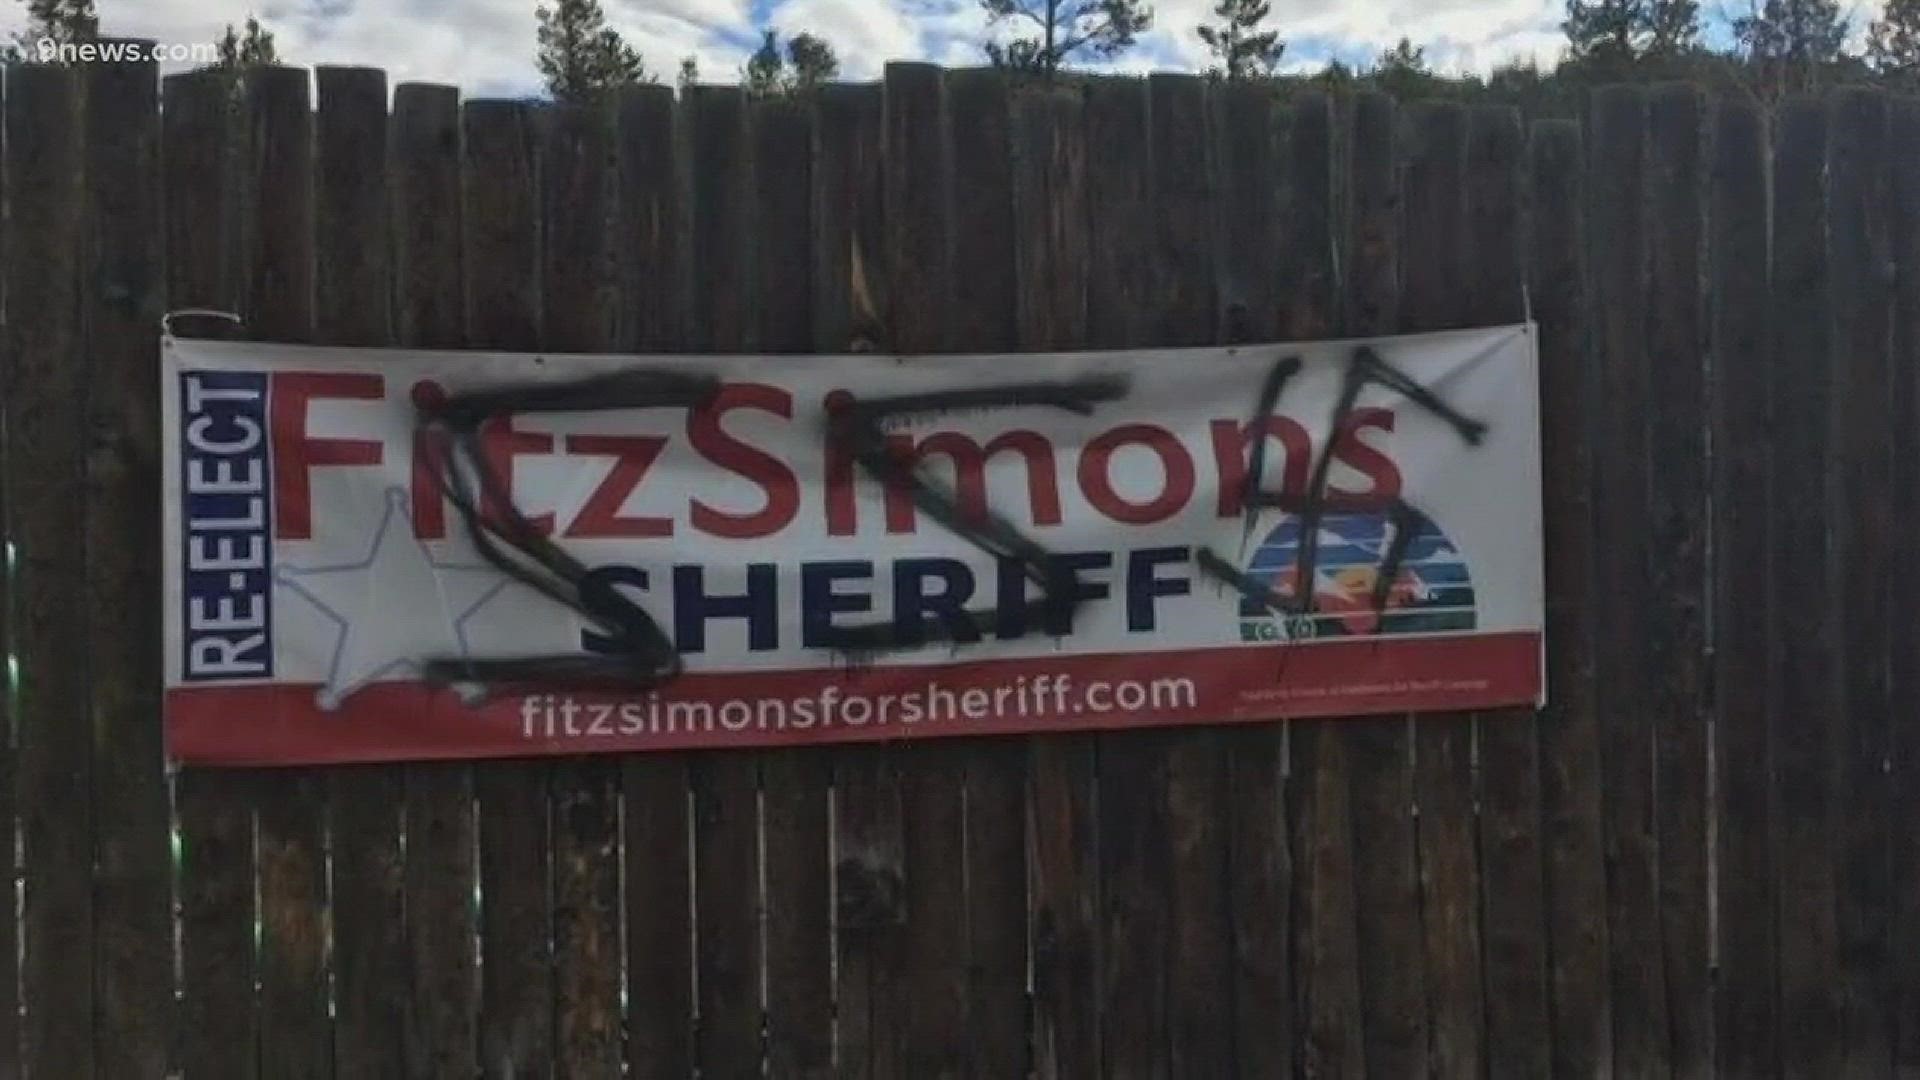 Someone covered a political sign in Summit County with swastikas and some other signs. The Sheriff had just replaced the sign after it had been cut down two days before.